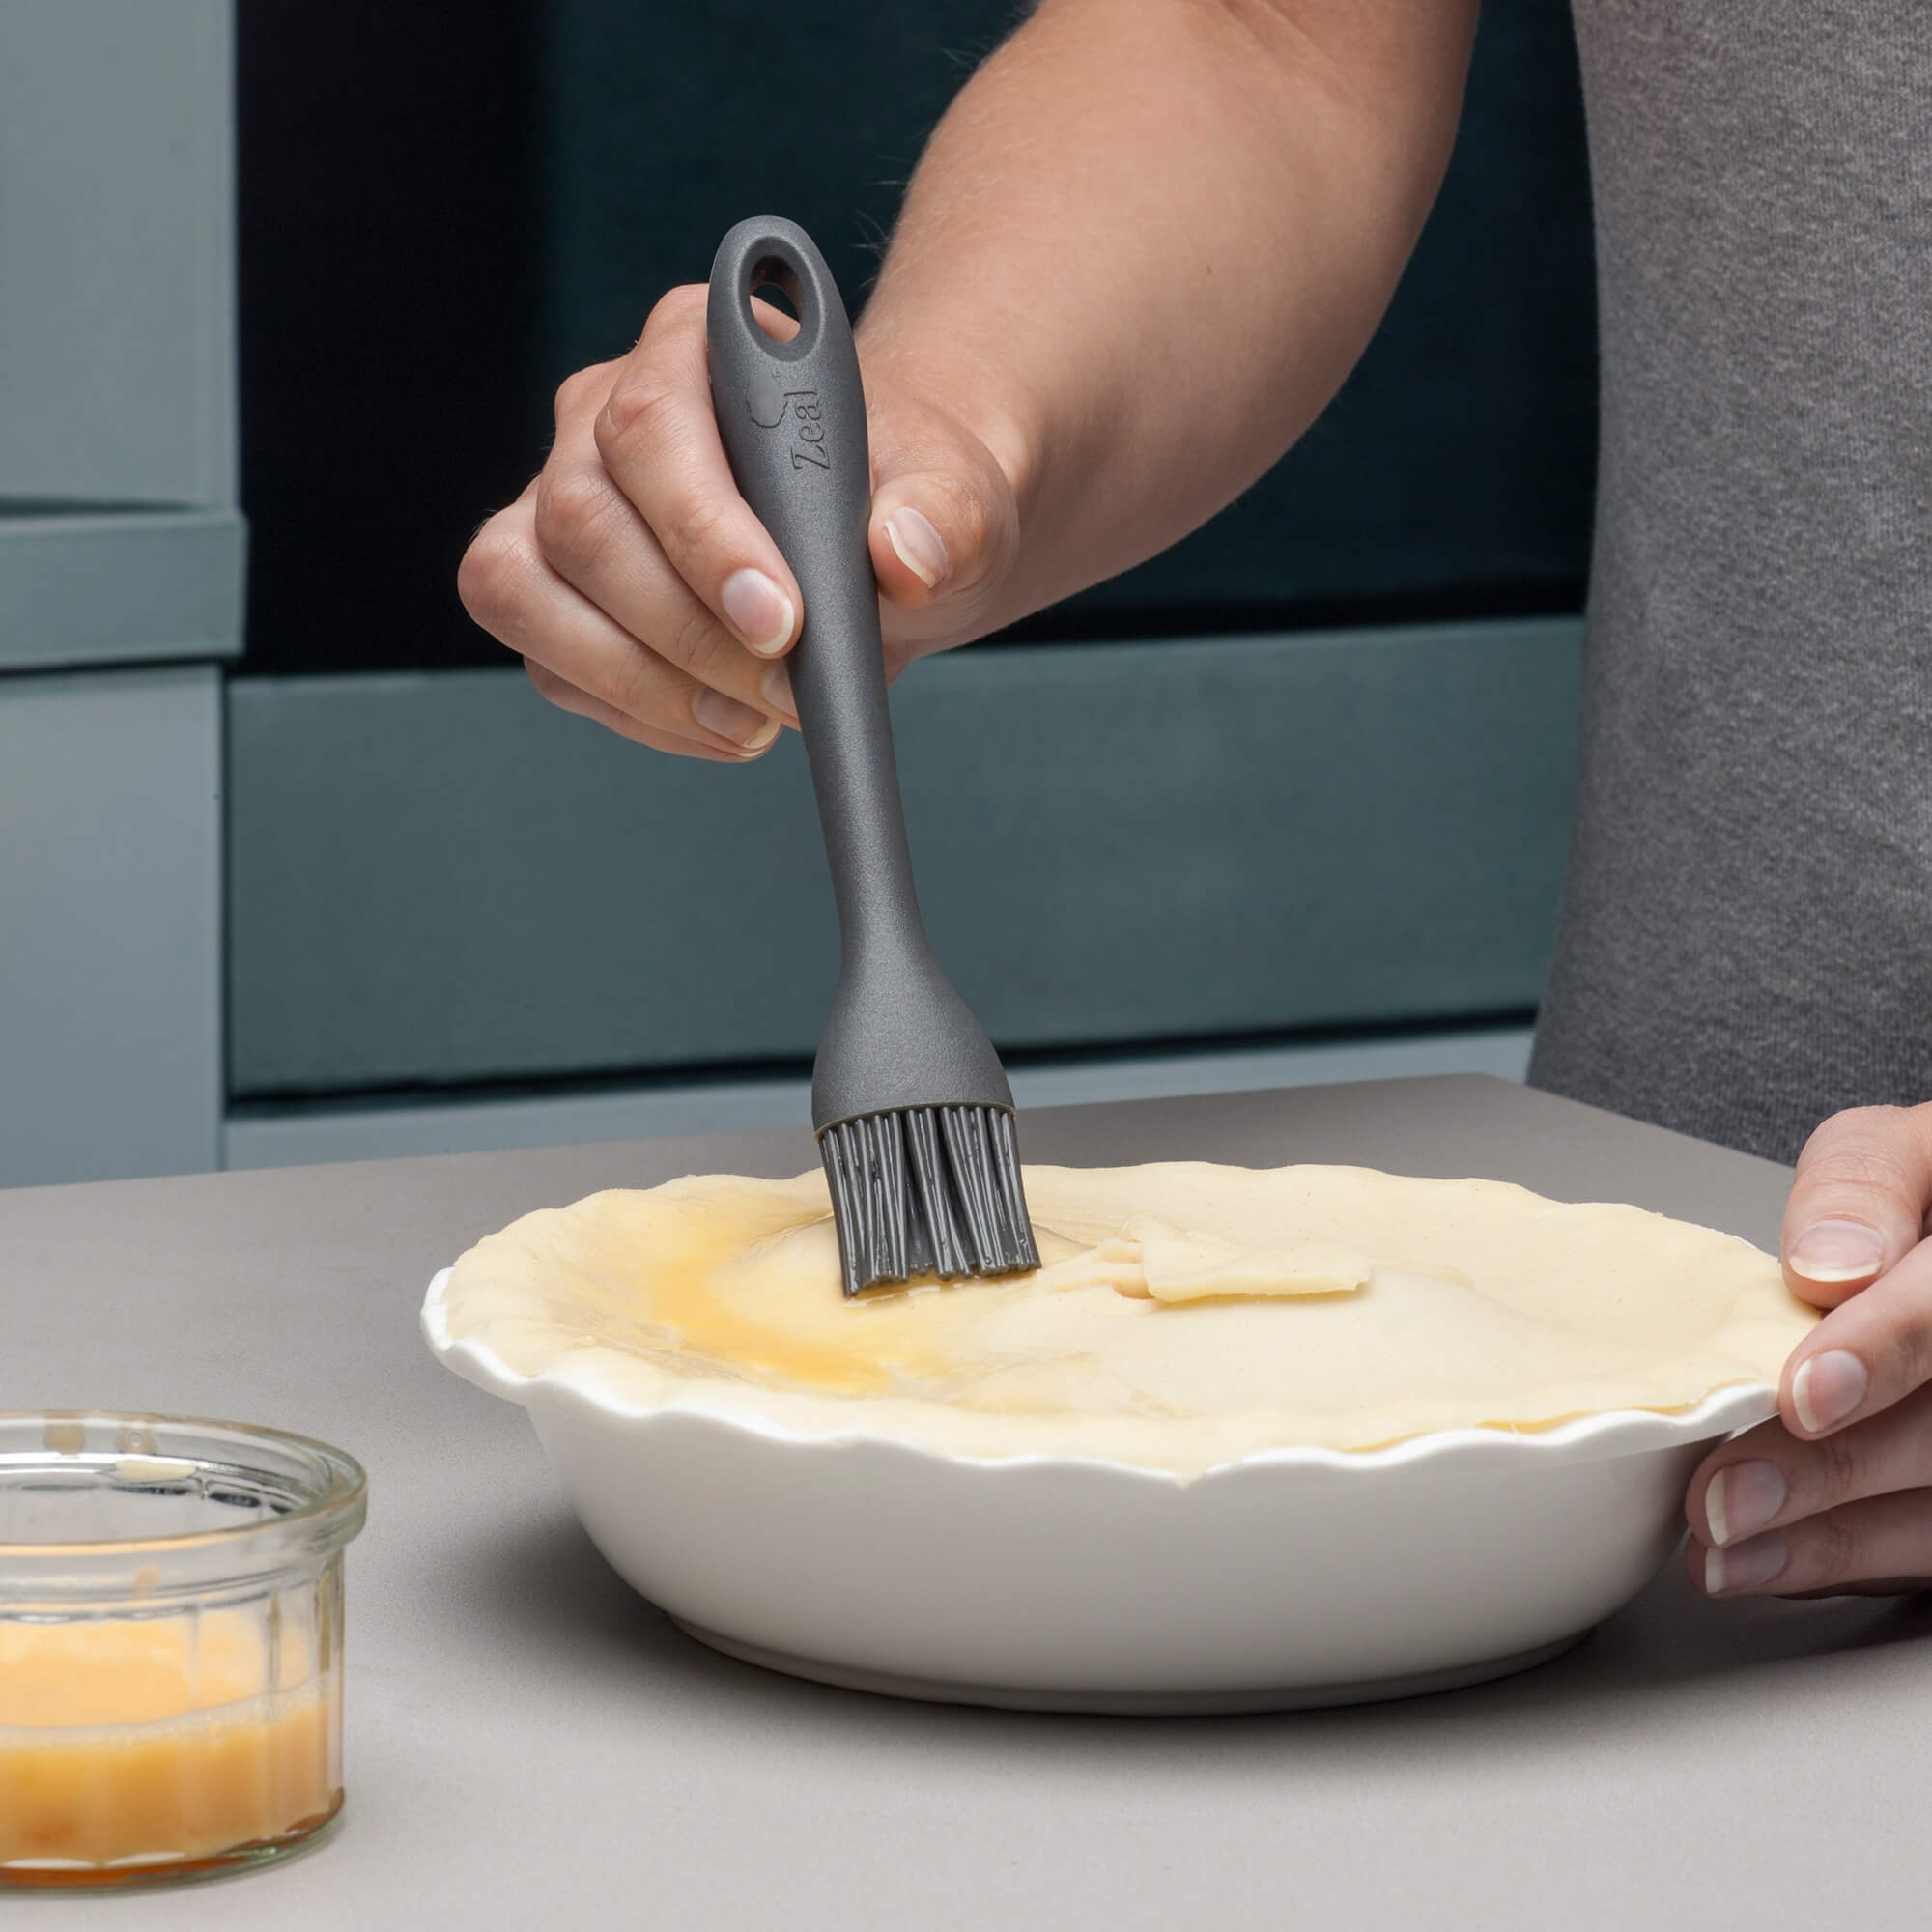 Using a Zeal Silicone Pastry Brush to egg wash a pie lid